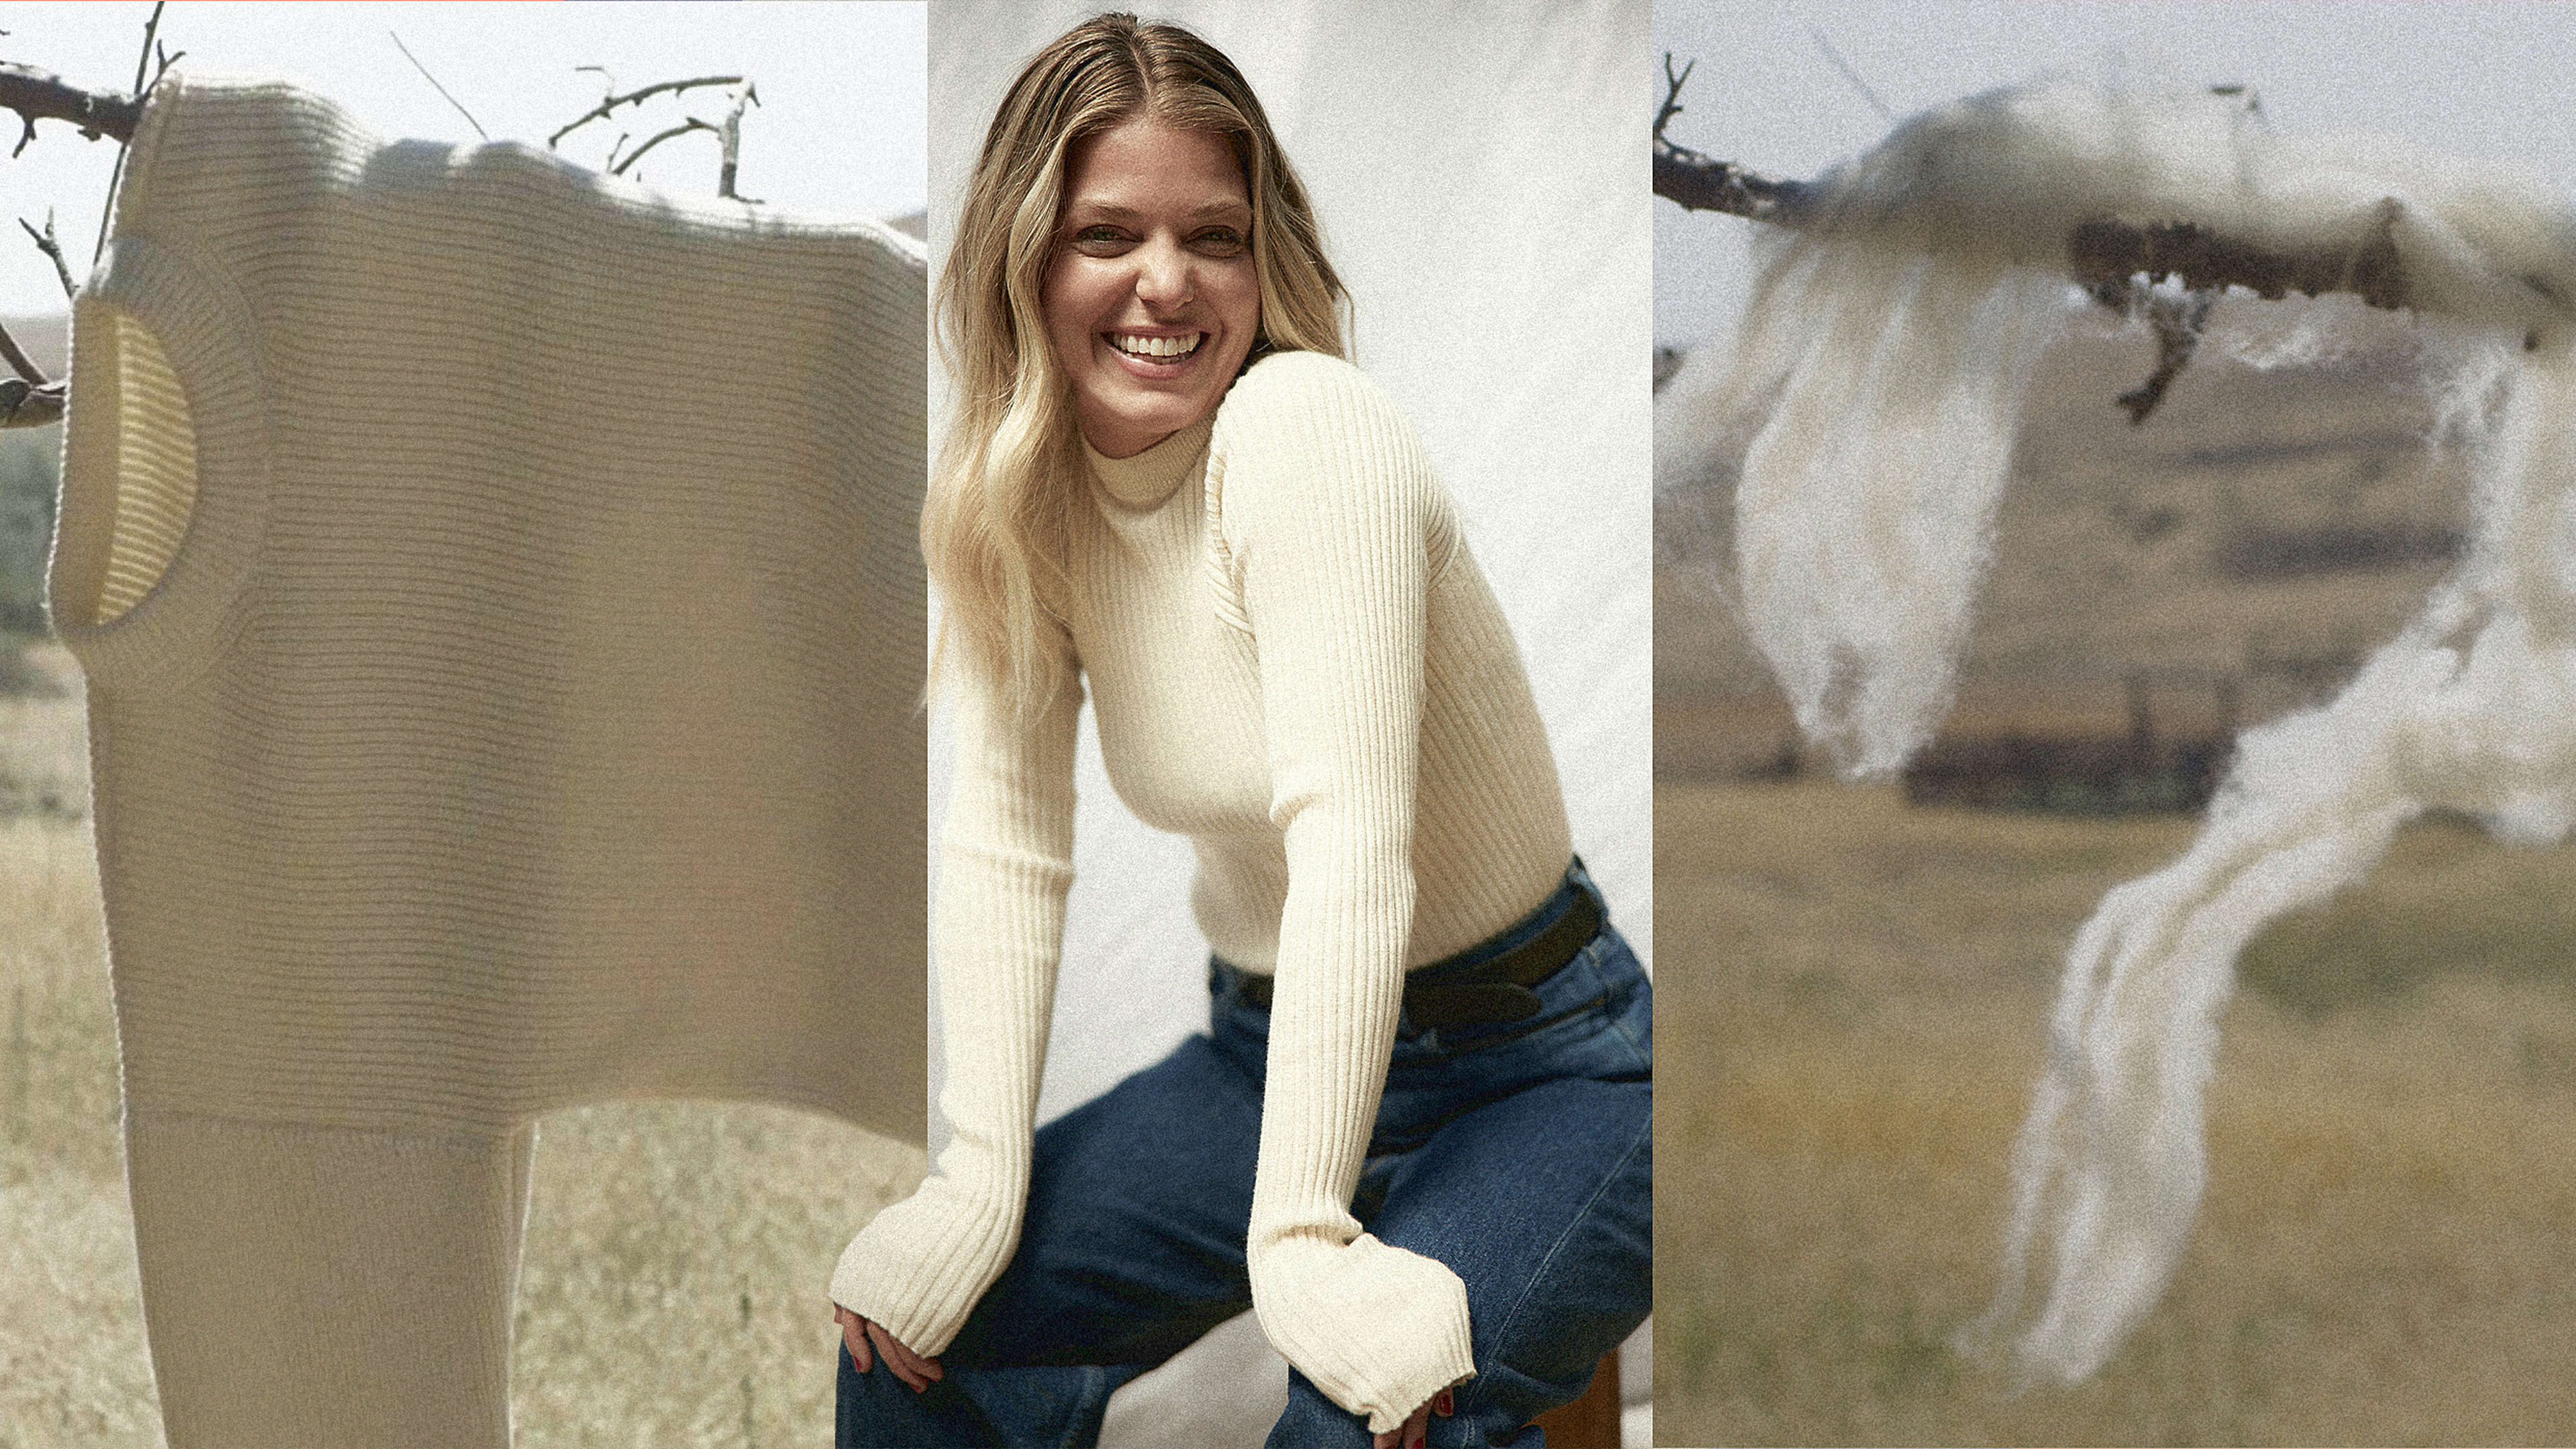 Meet the female rancher fighting to make your clothes out of American wool